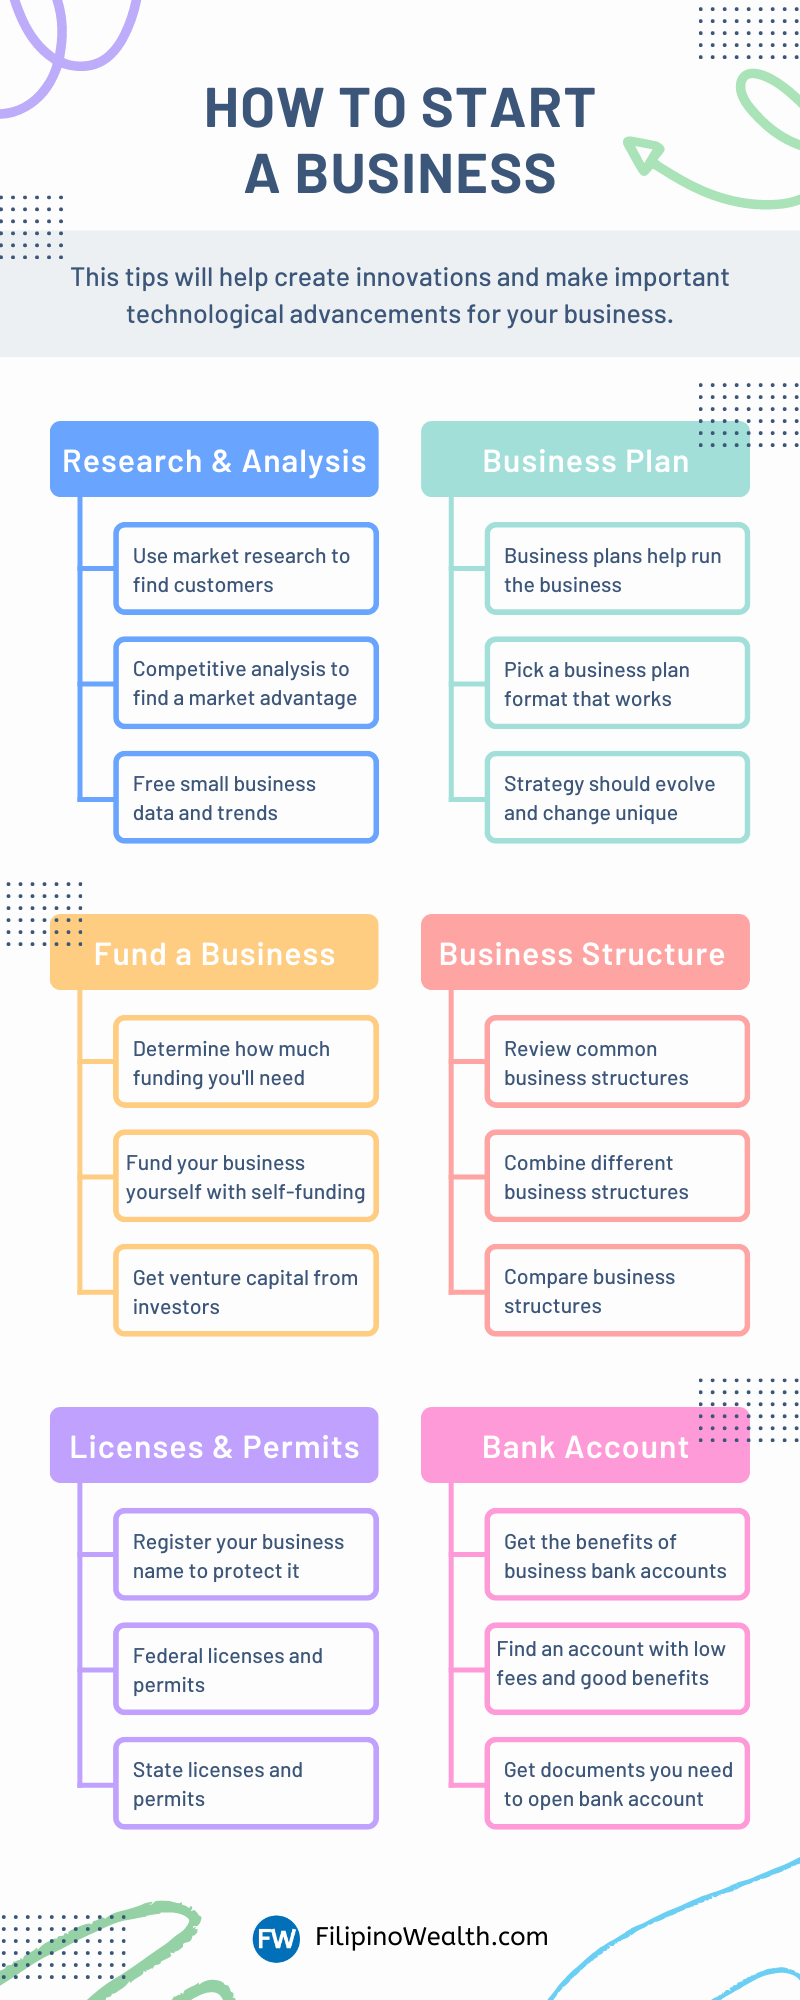 pinoy small business ideas philippines 